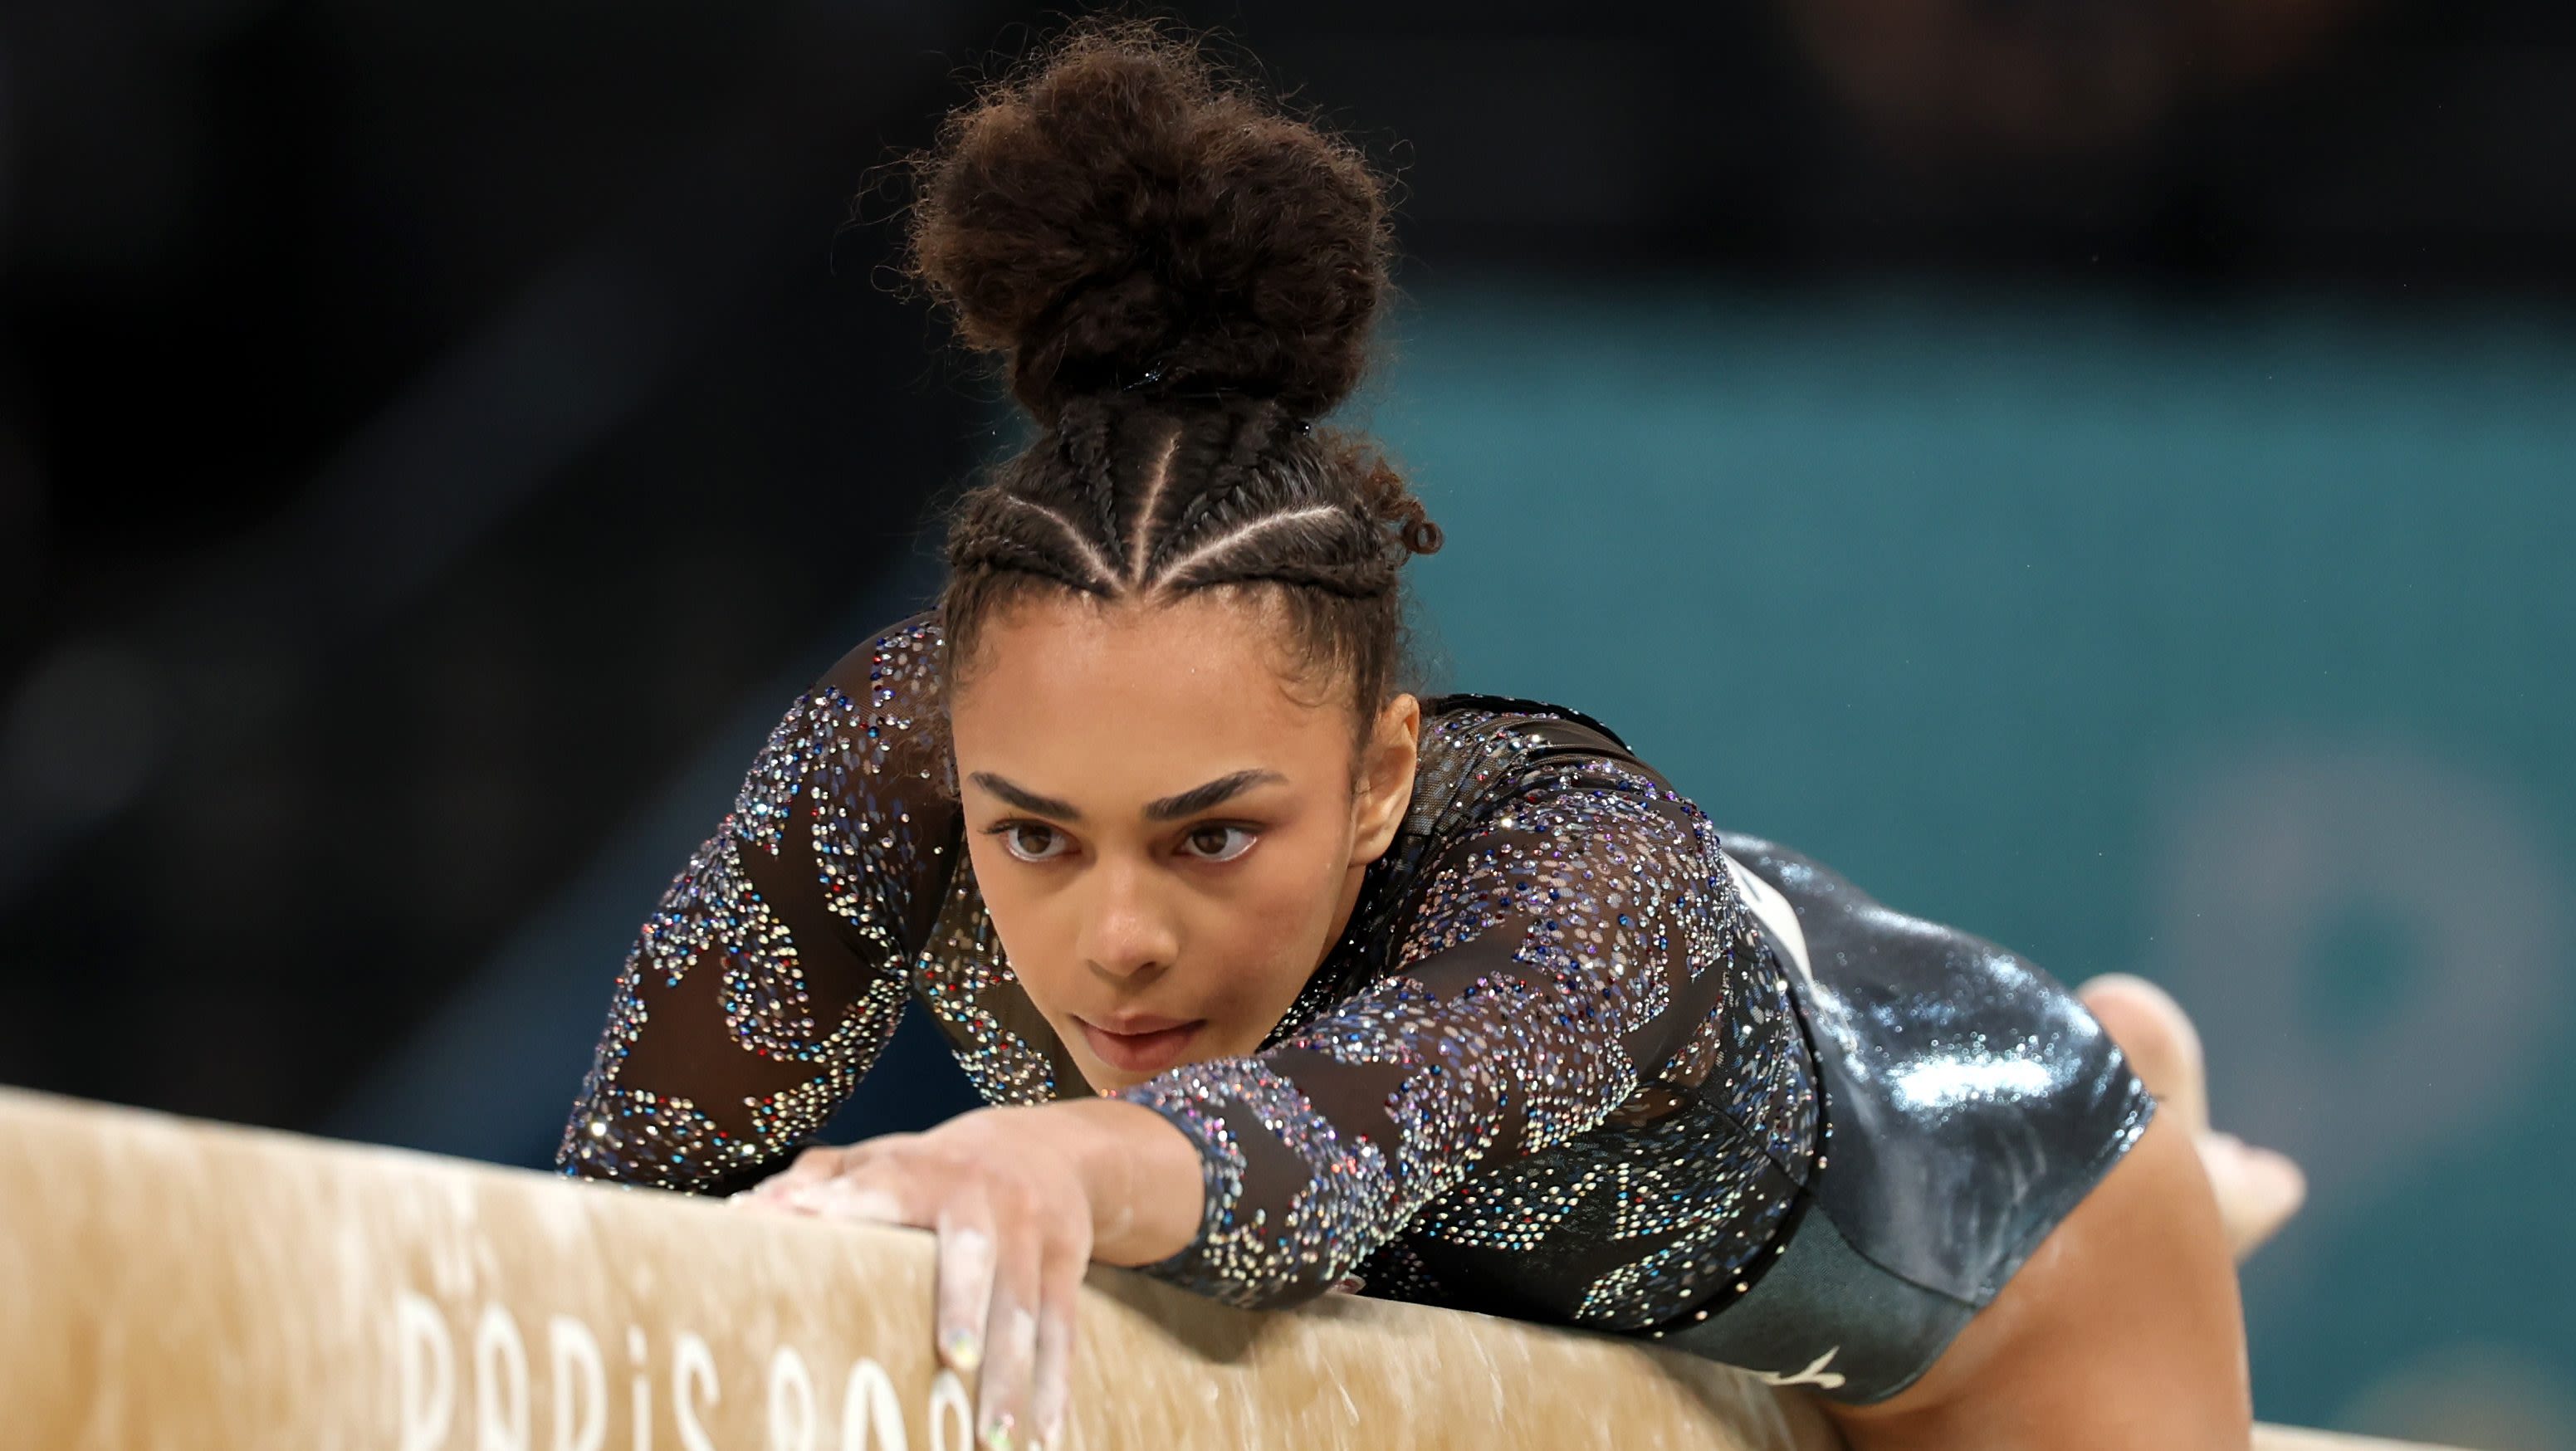 Gymnast Hezly Rivera Sends Two-Word Message to Parents After Olympic Setback